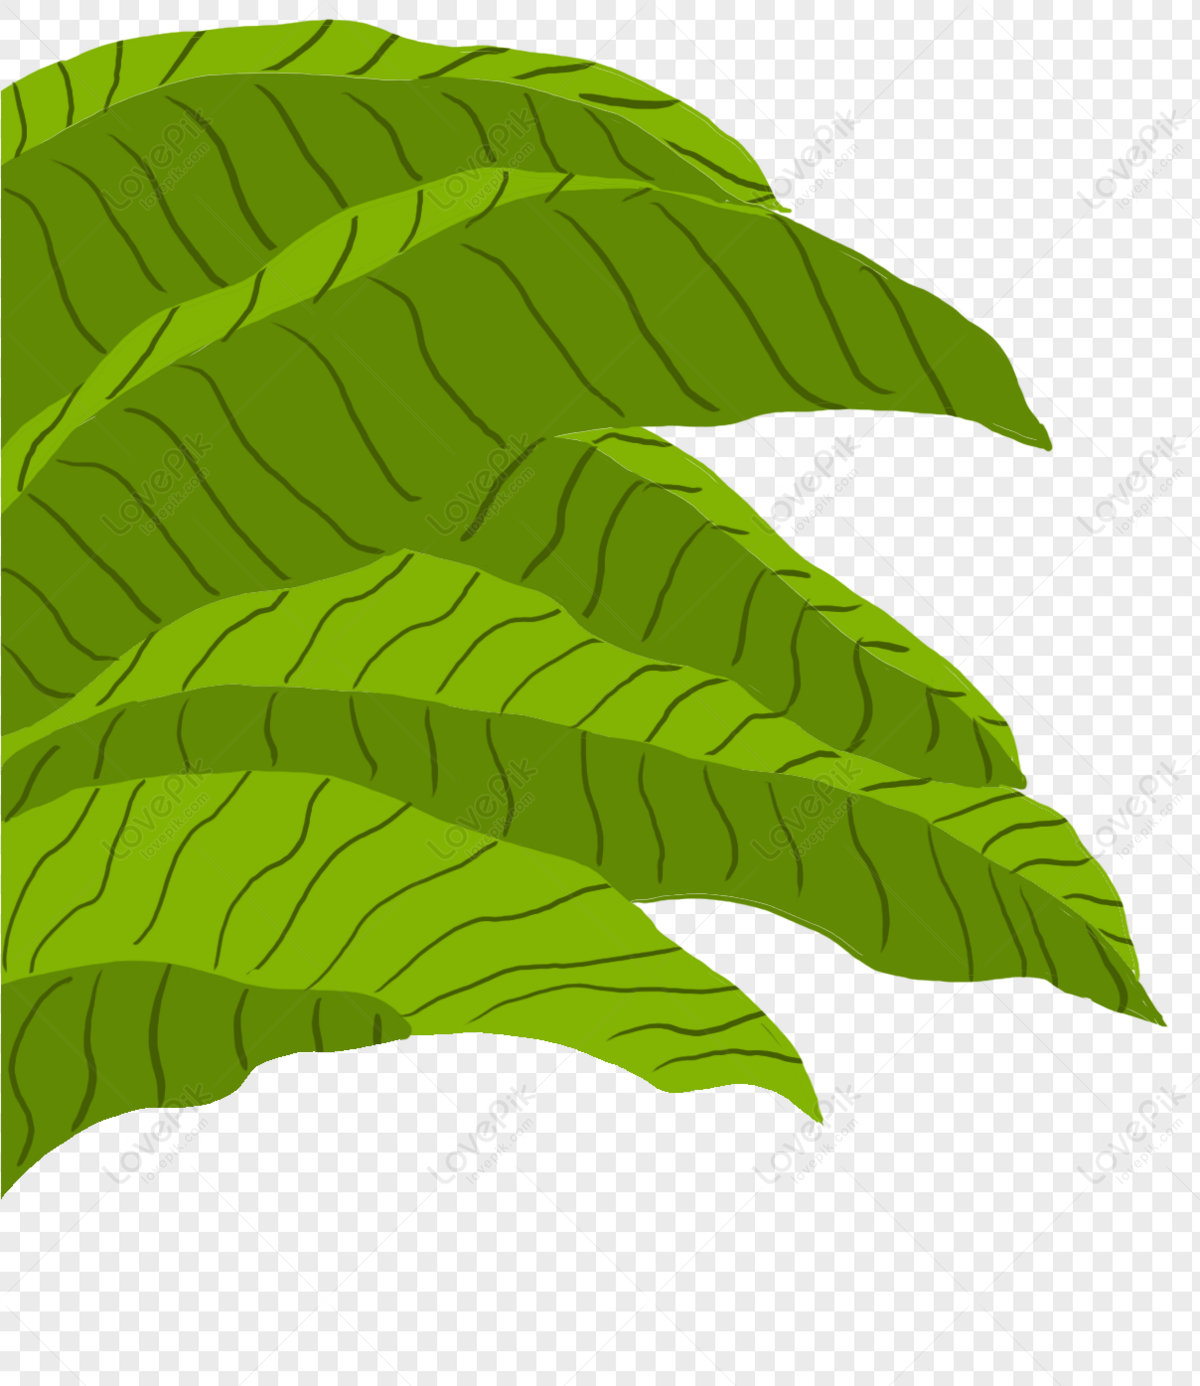 Banana Leaf Free PNG And Clipart Image For Free Download - Lovepik |  400414799